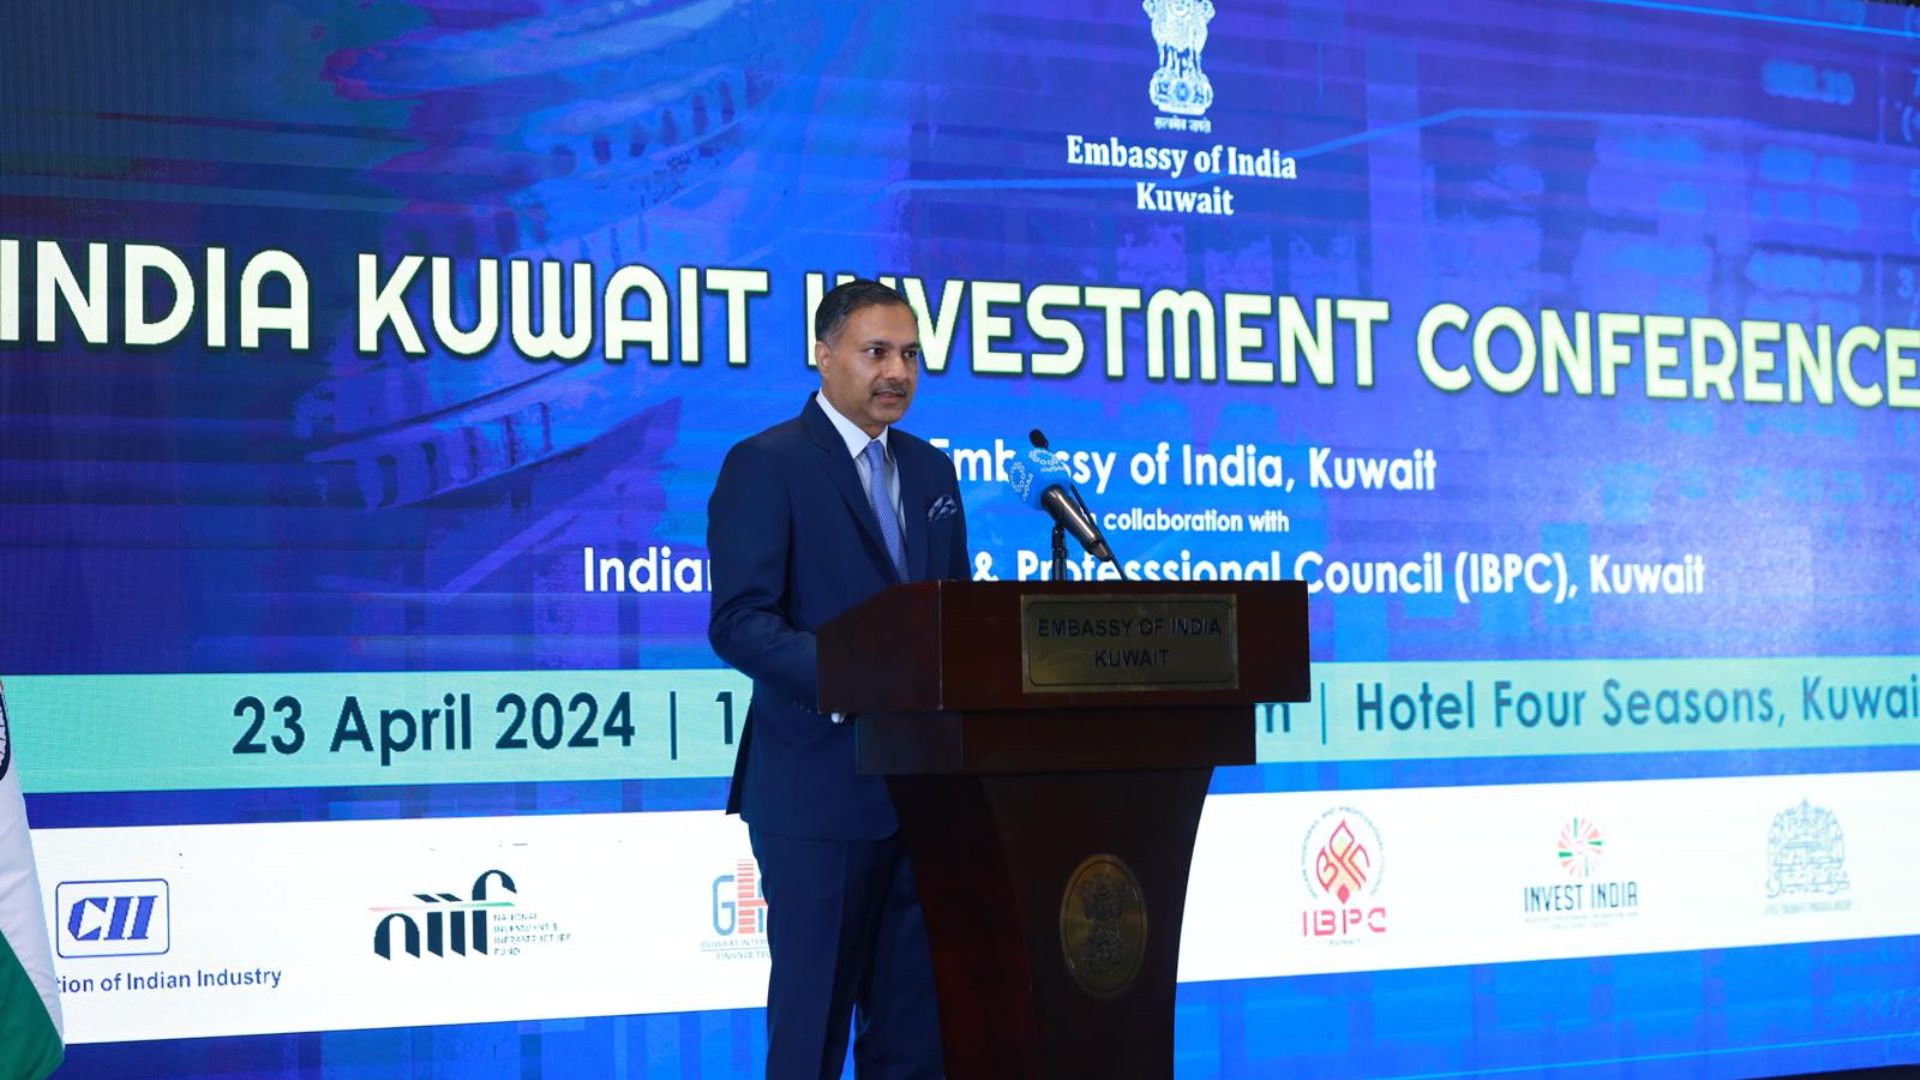 India and Kuwait Strengthen Economic Ties with MoU on Information Sharing at Investment Conference 2.0